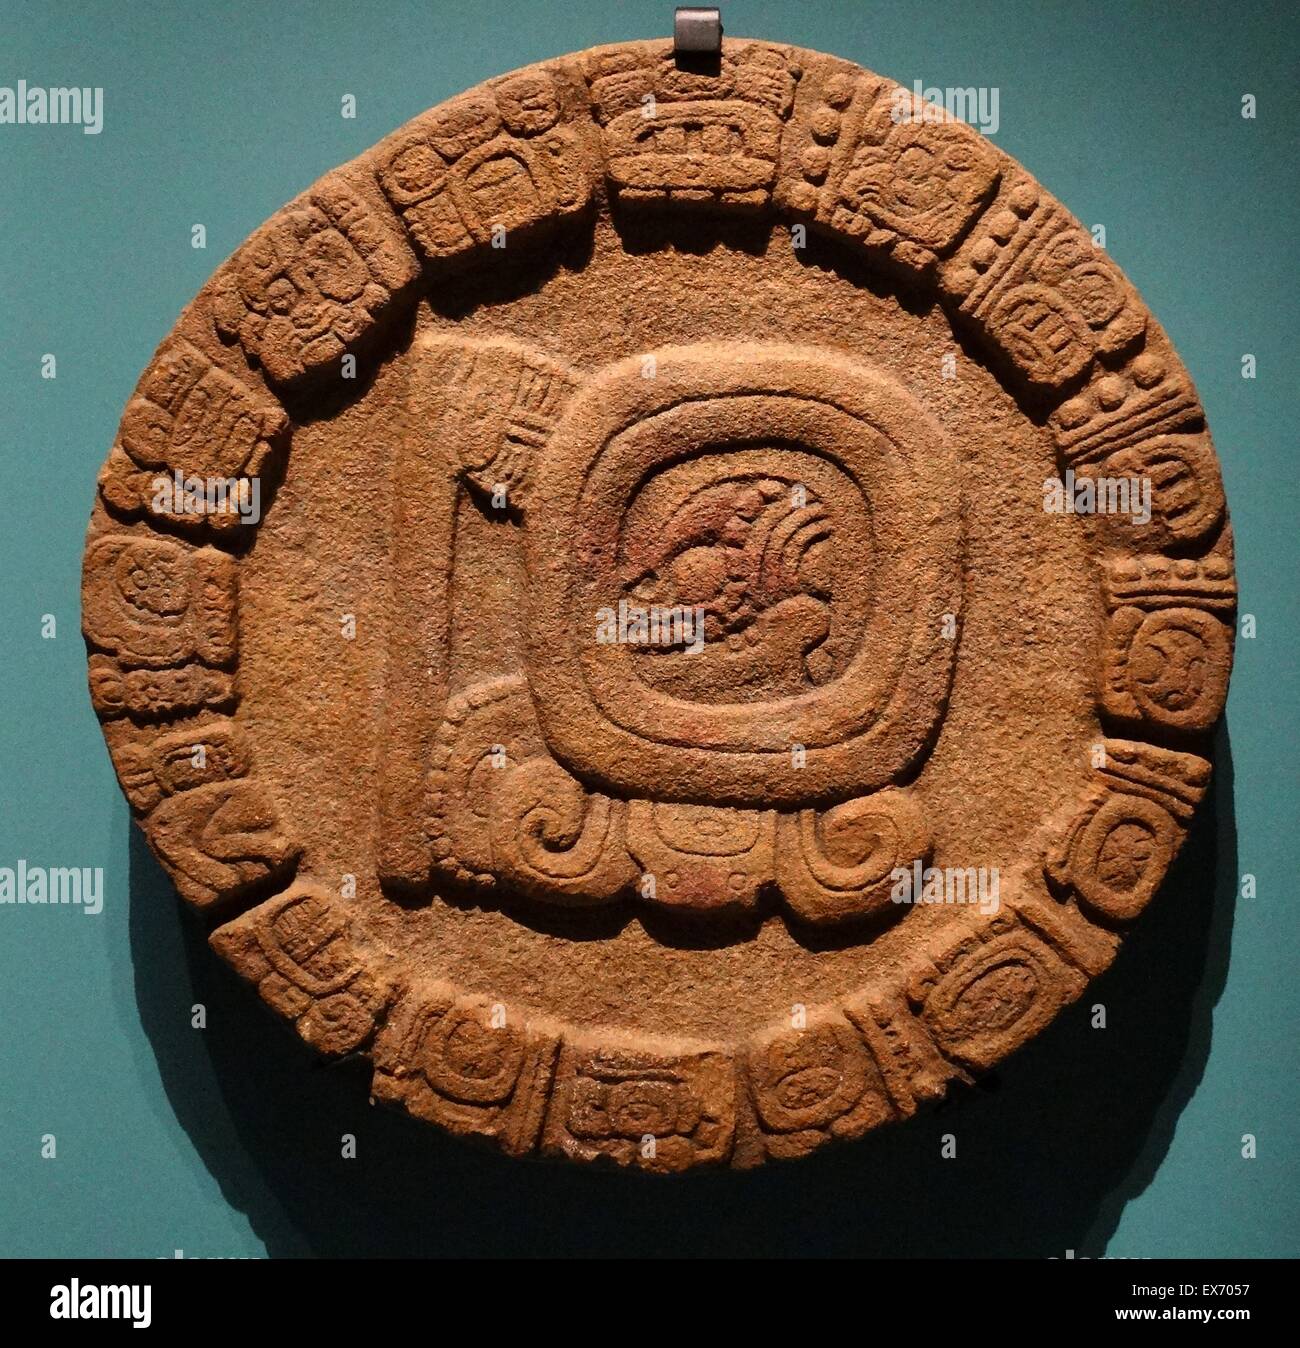 Mayan stone disk monument from Tonina, s a pre-Columbian Stock Photo ...